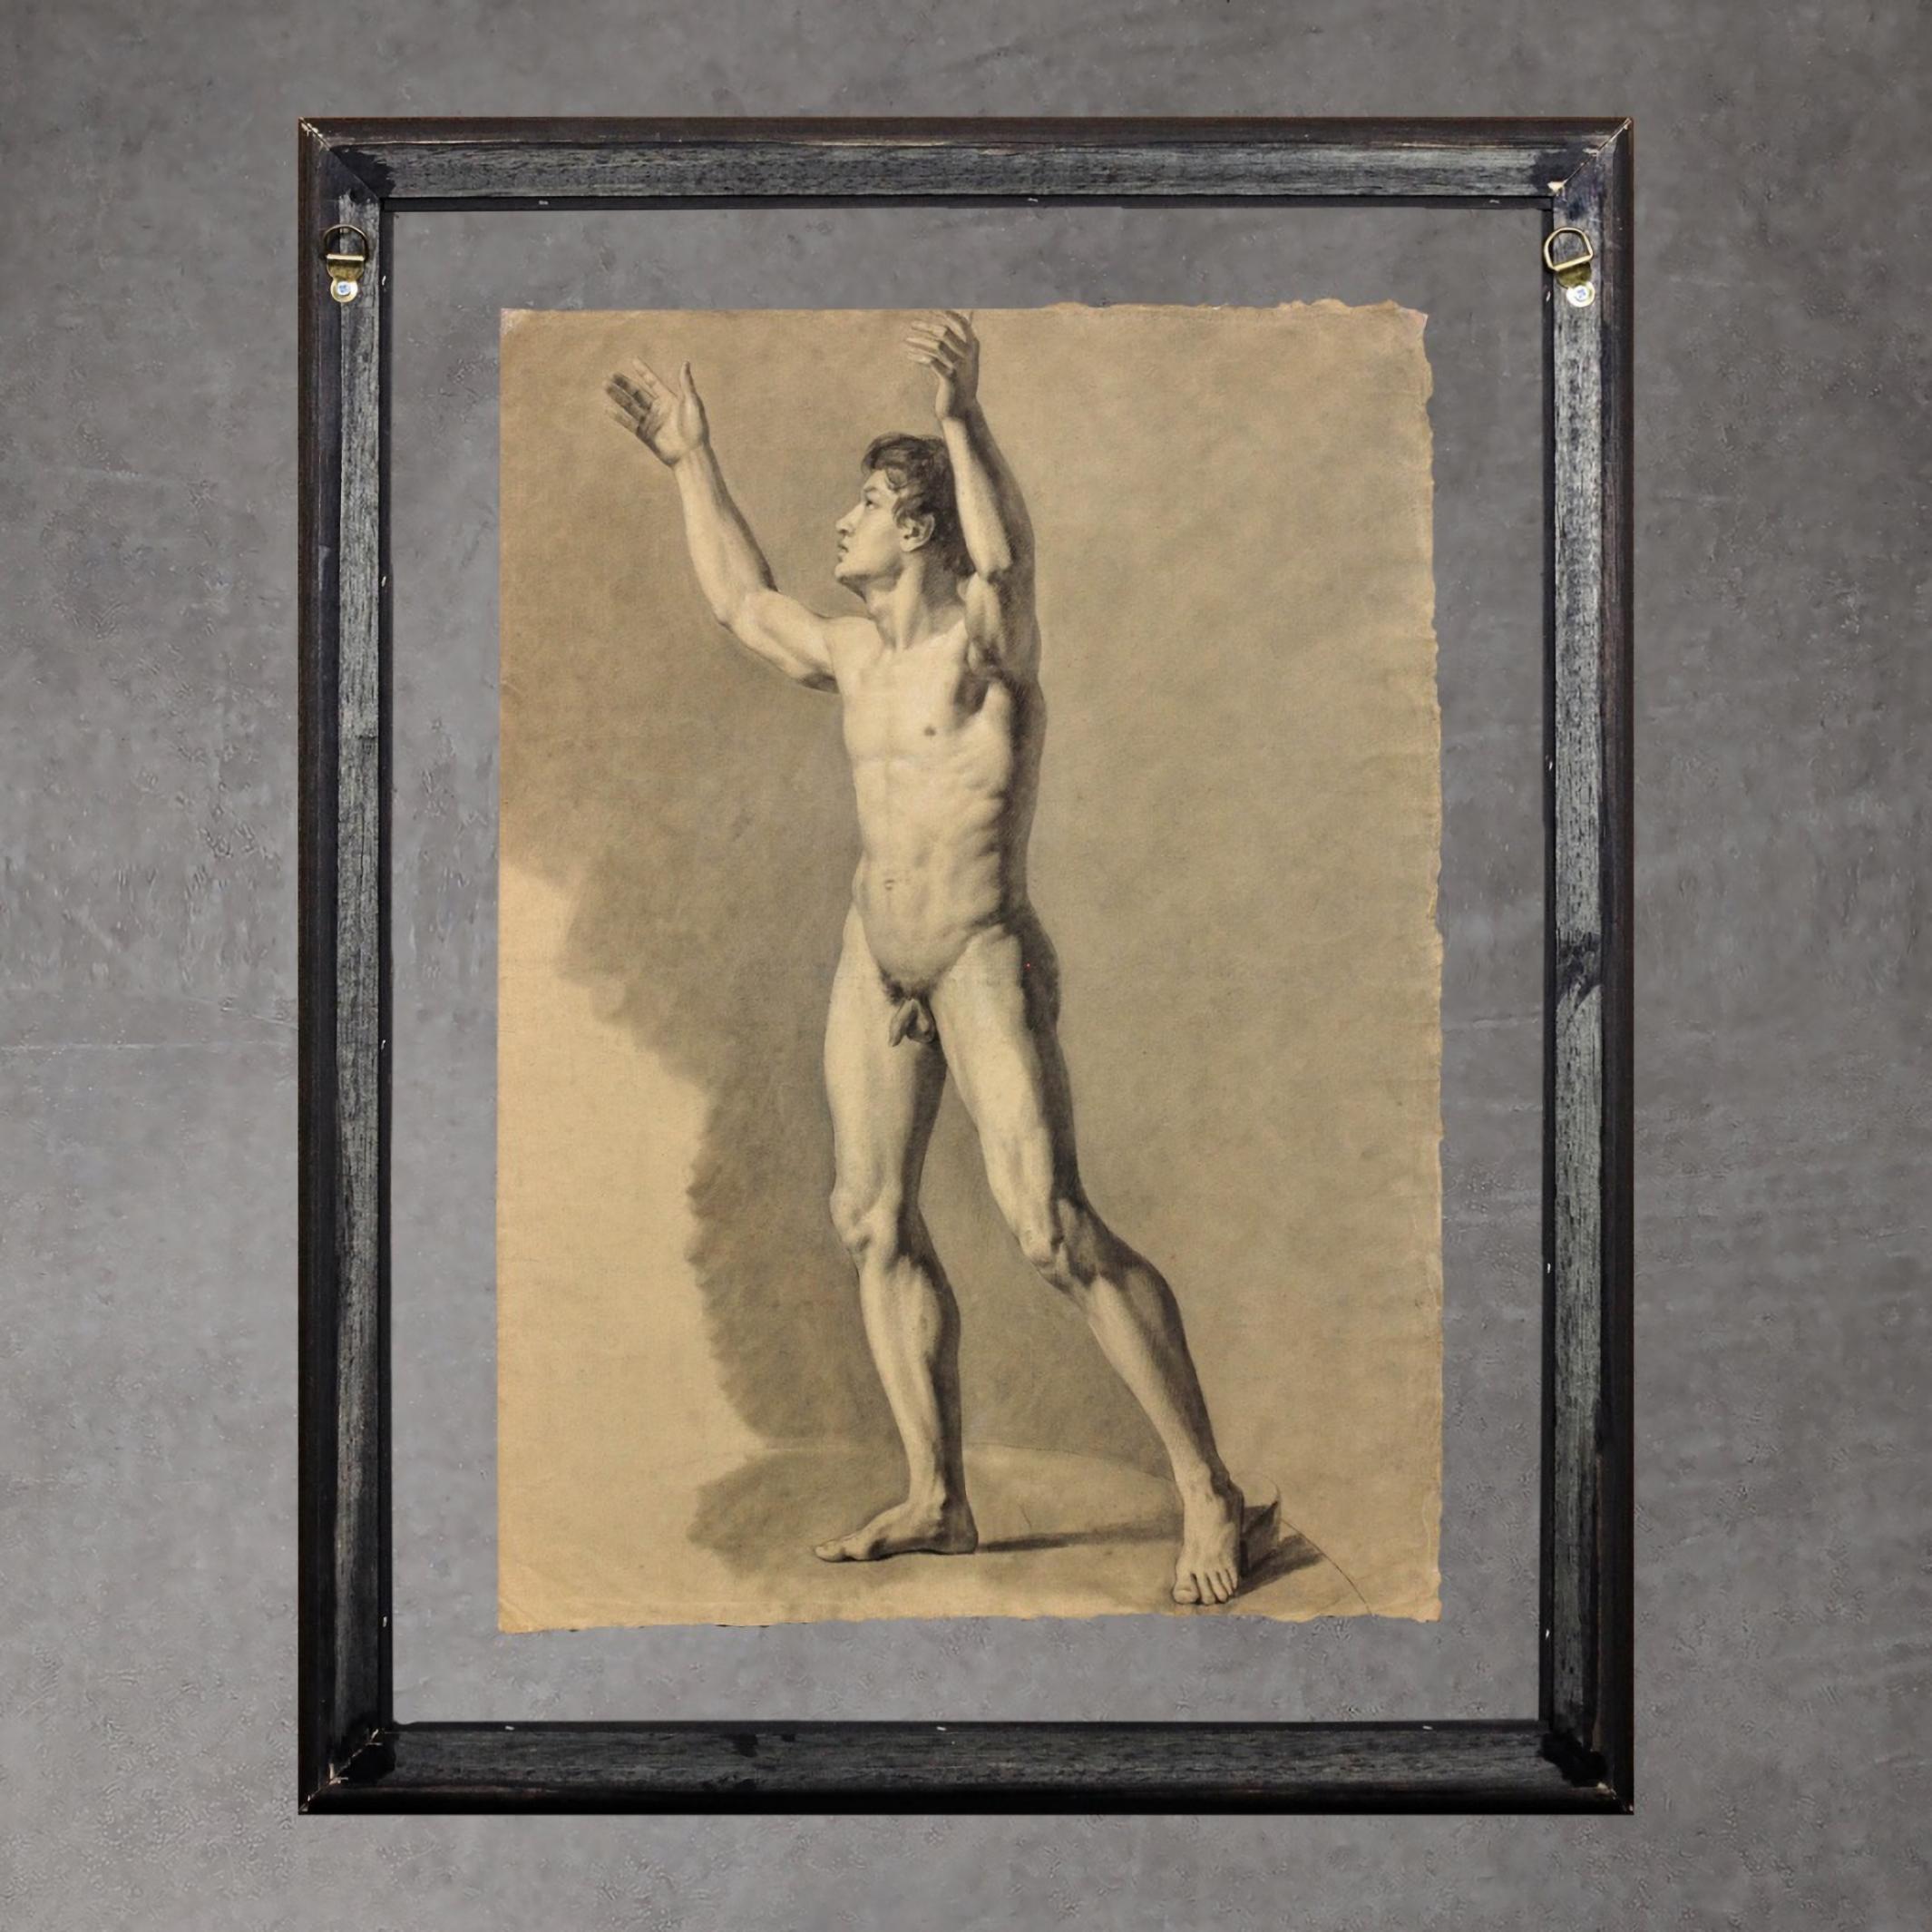 Eduard Braun.
German ( b.1798 - d.1876 ).
Academic Life Study of a Male Nude Rear View Holding a Cane
on the reverse Academic Life Study of a Male Nude Arms Aloft Pose
Pencil and Charcoal on Paper with Heightening on paper.
Paper size 23 inches x